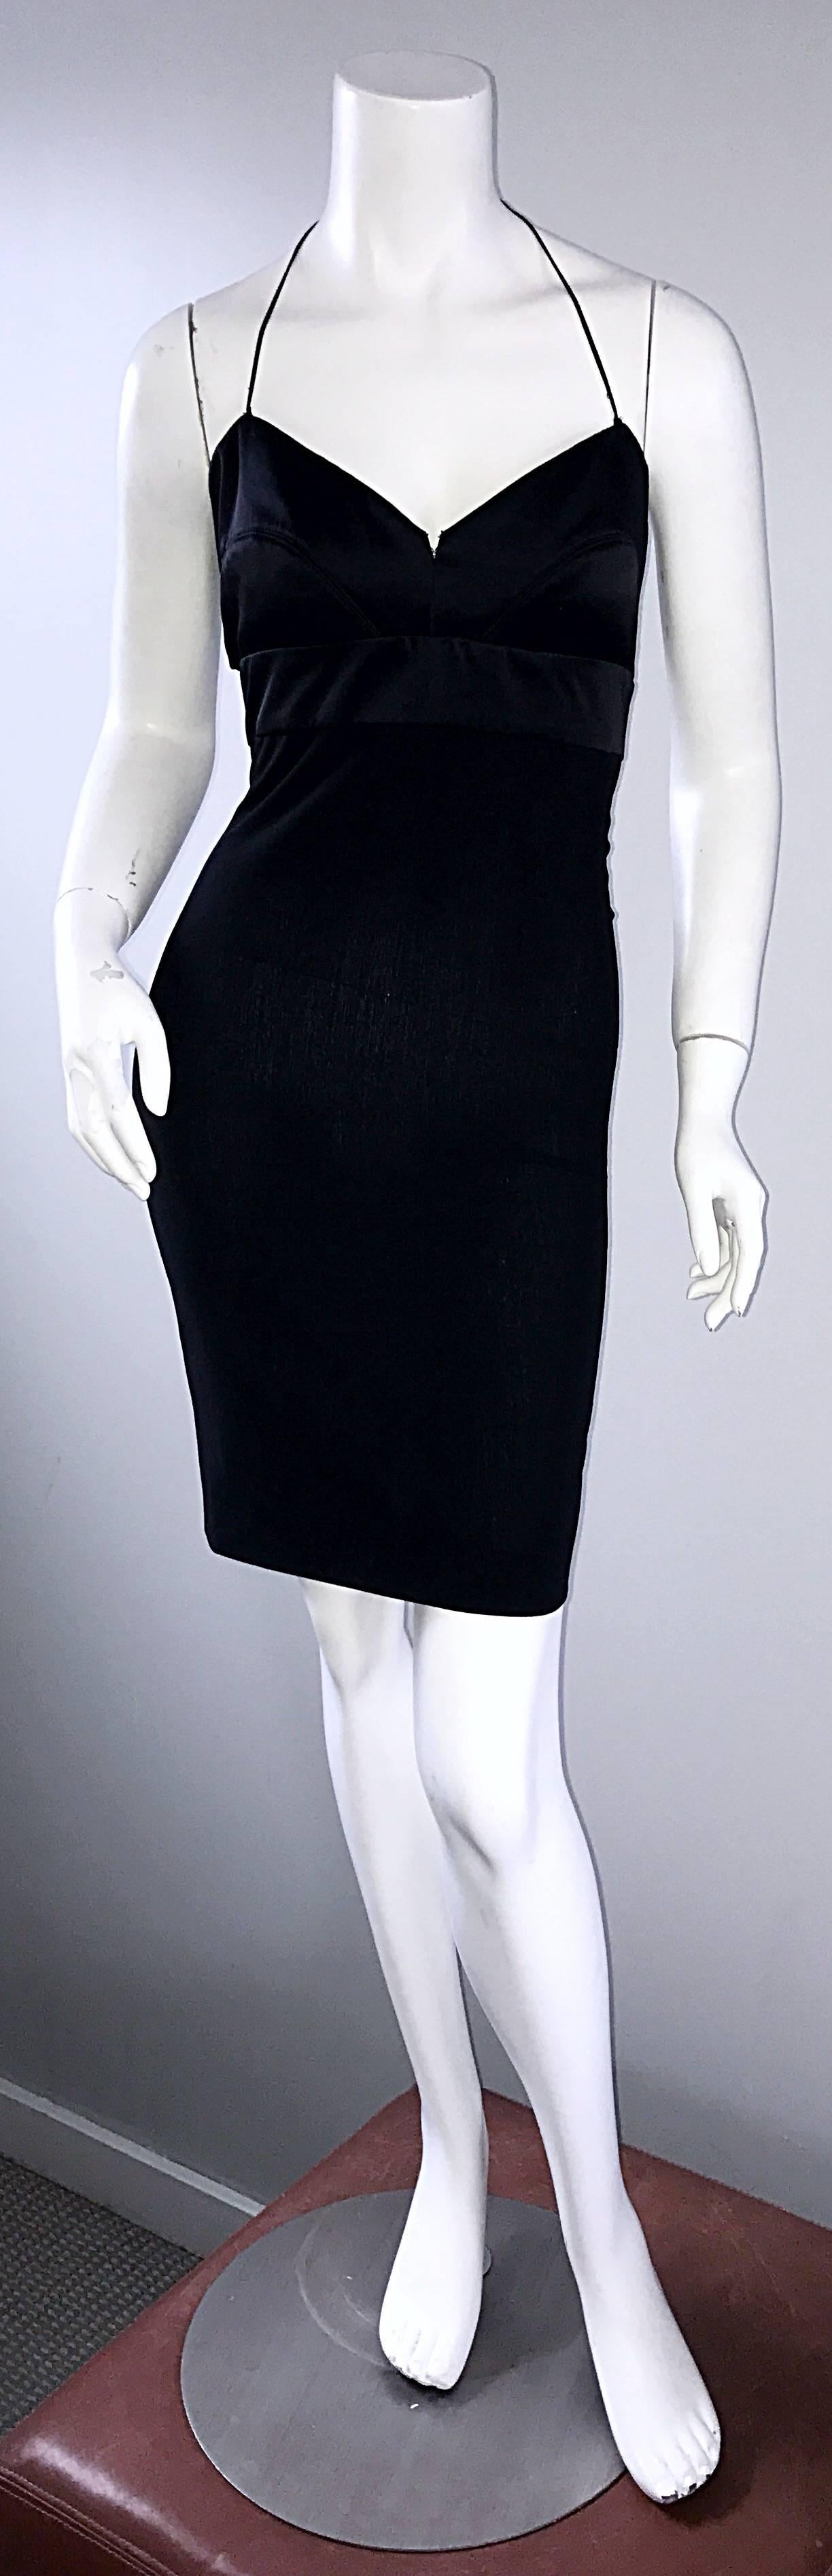 Narcisco Rodriguez First Collection 1997 Black Sexy Bodycon Cut - Out Back Dress For Sale 4